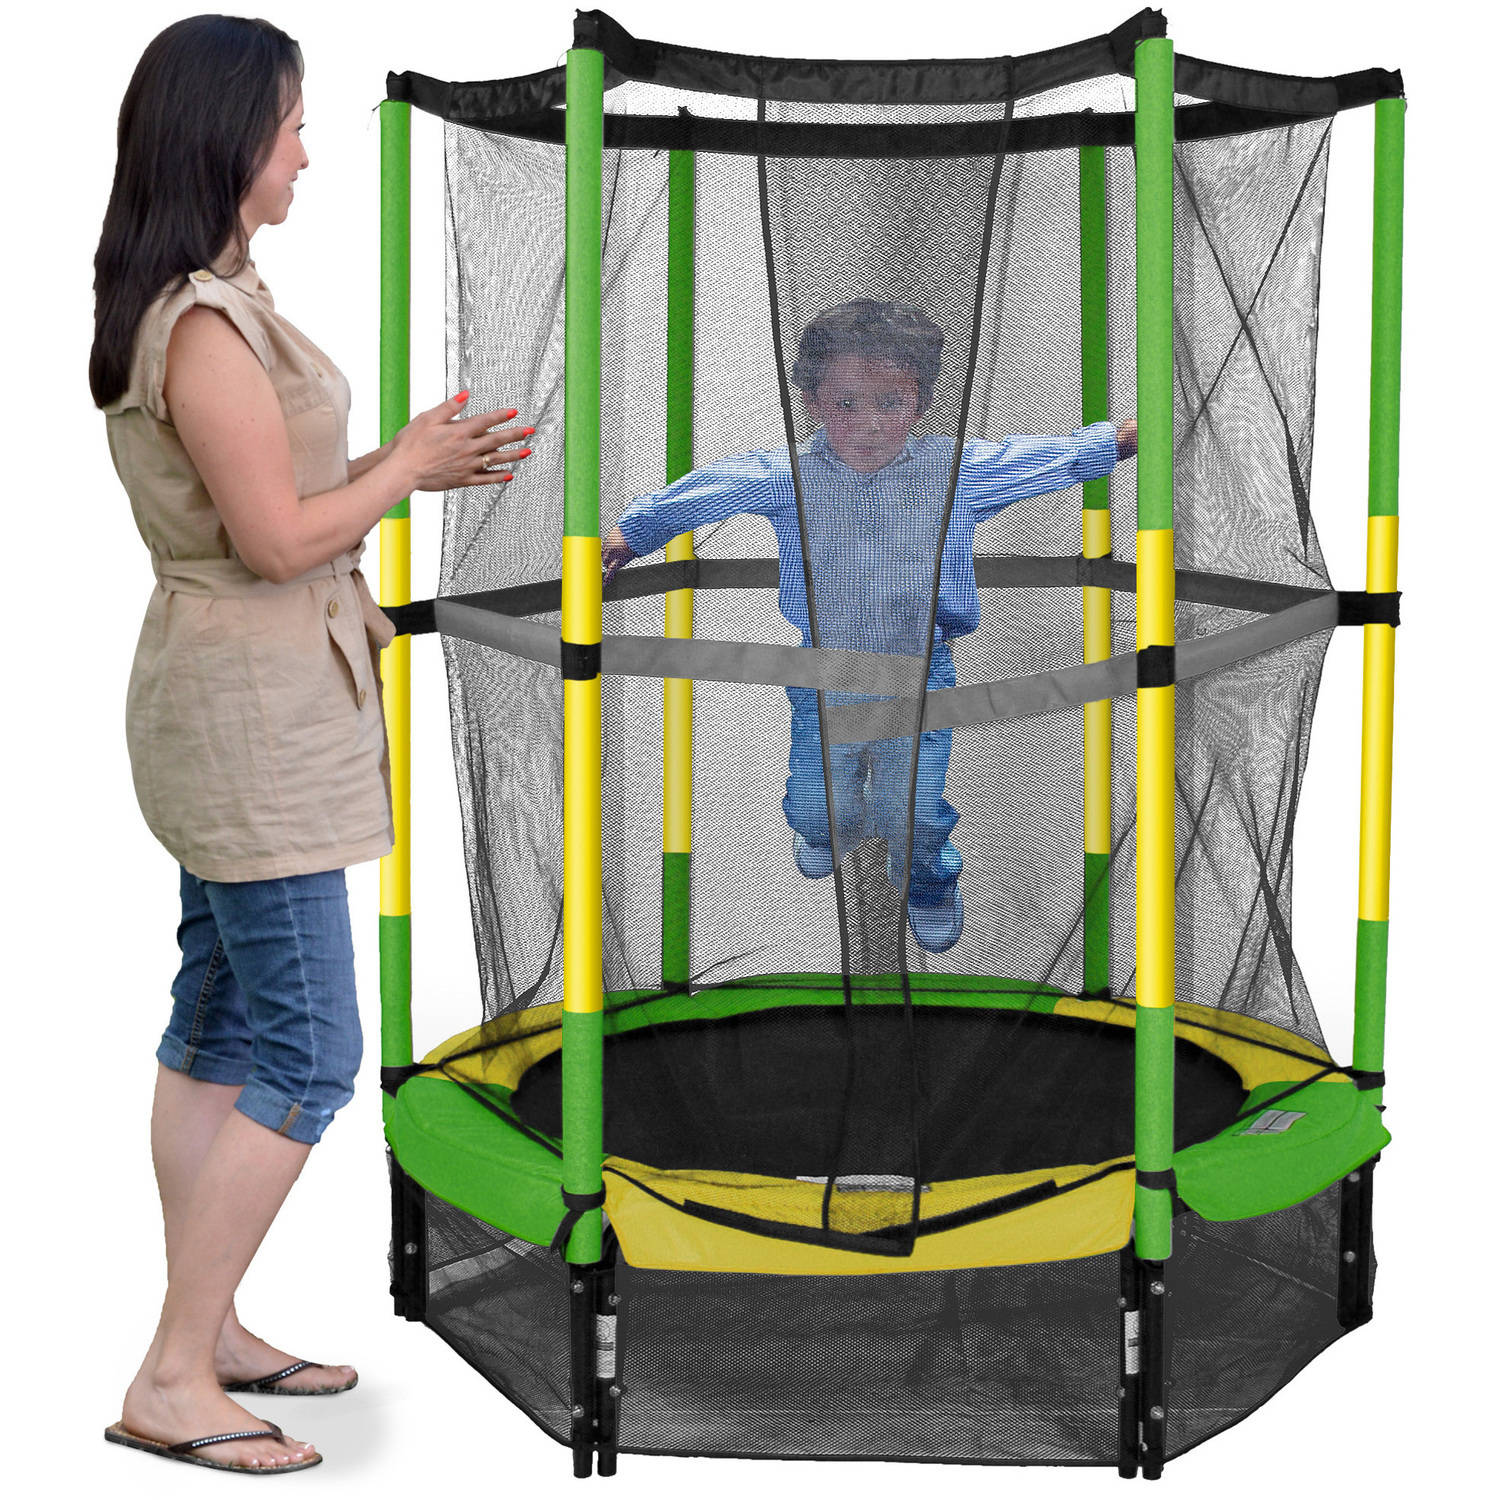 Bounce Pro 55-Inch My First Trampoline, with Safety Enclosure, Green - image 3 of 4